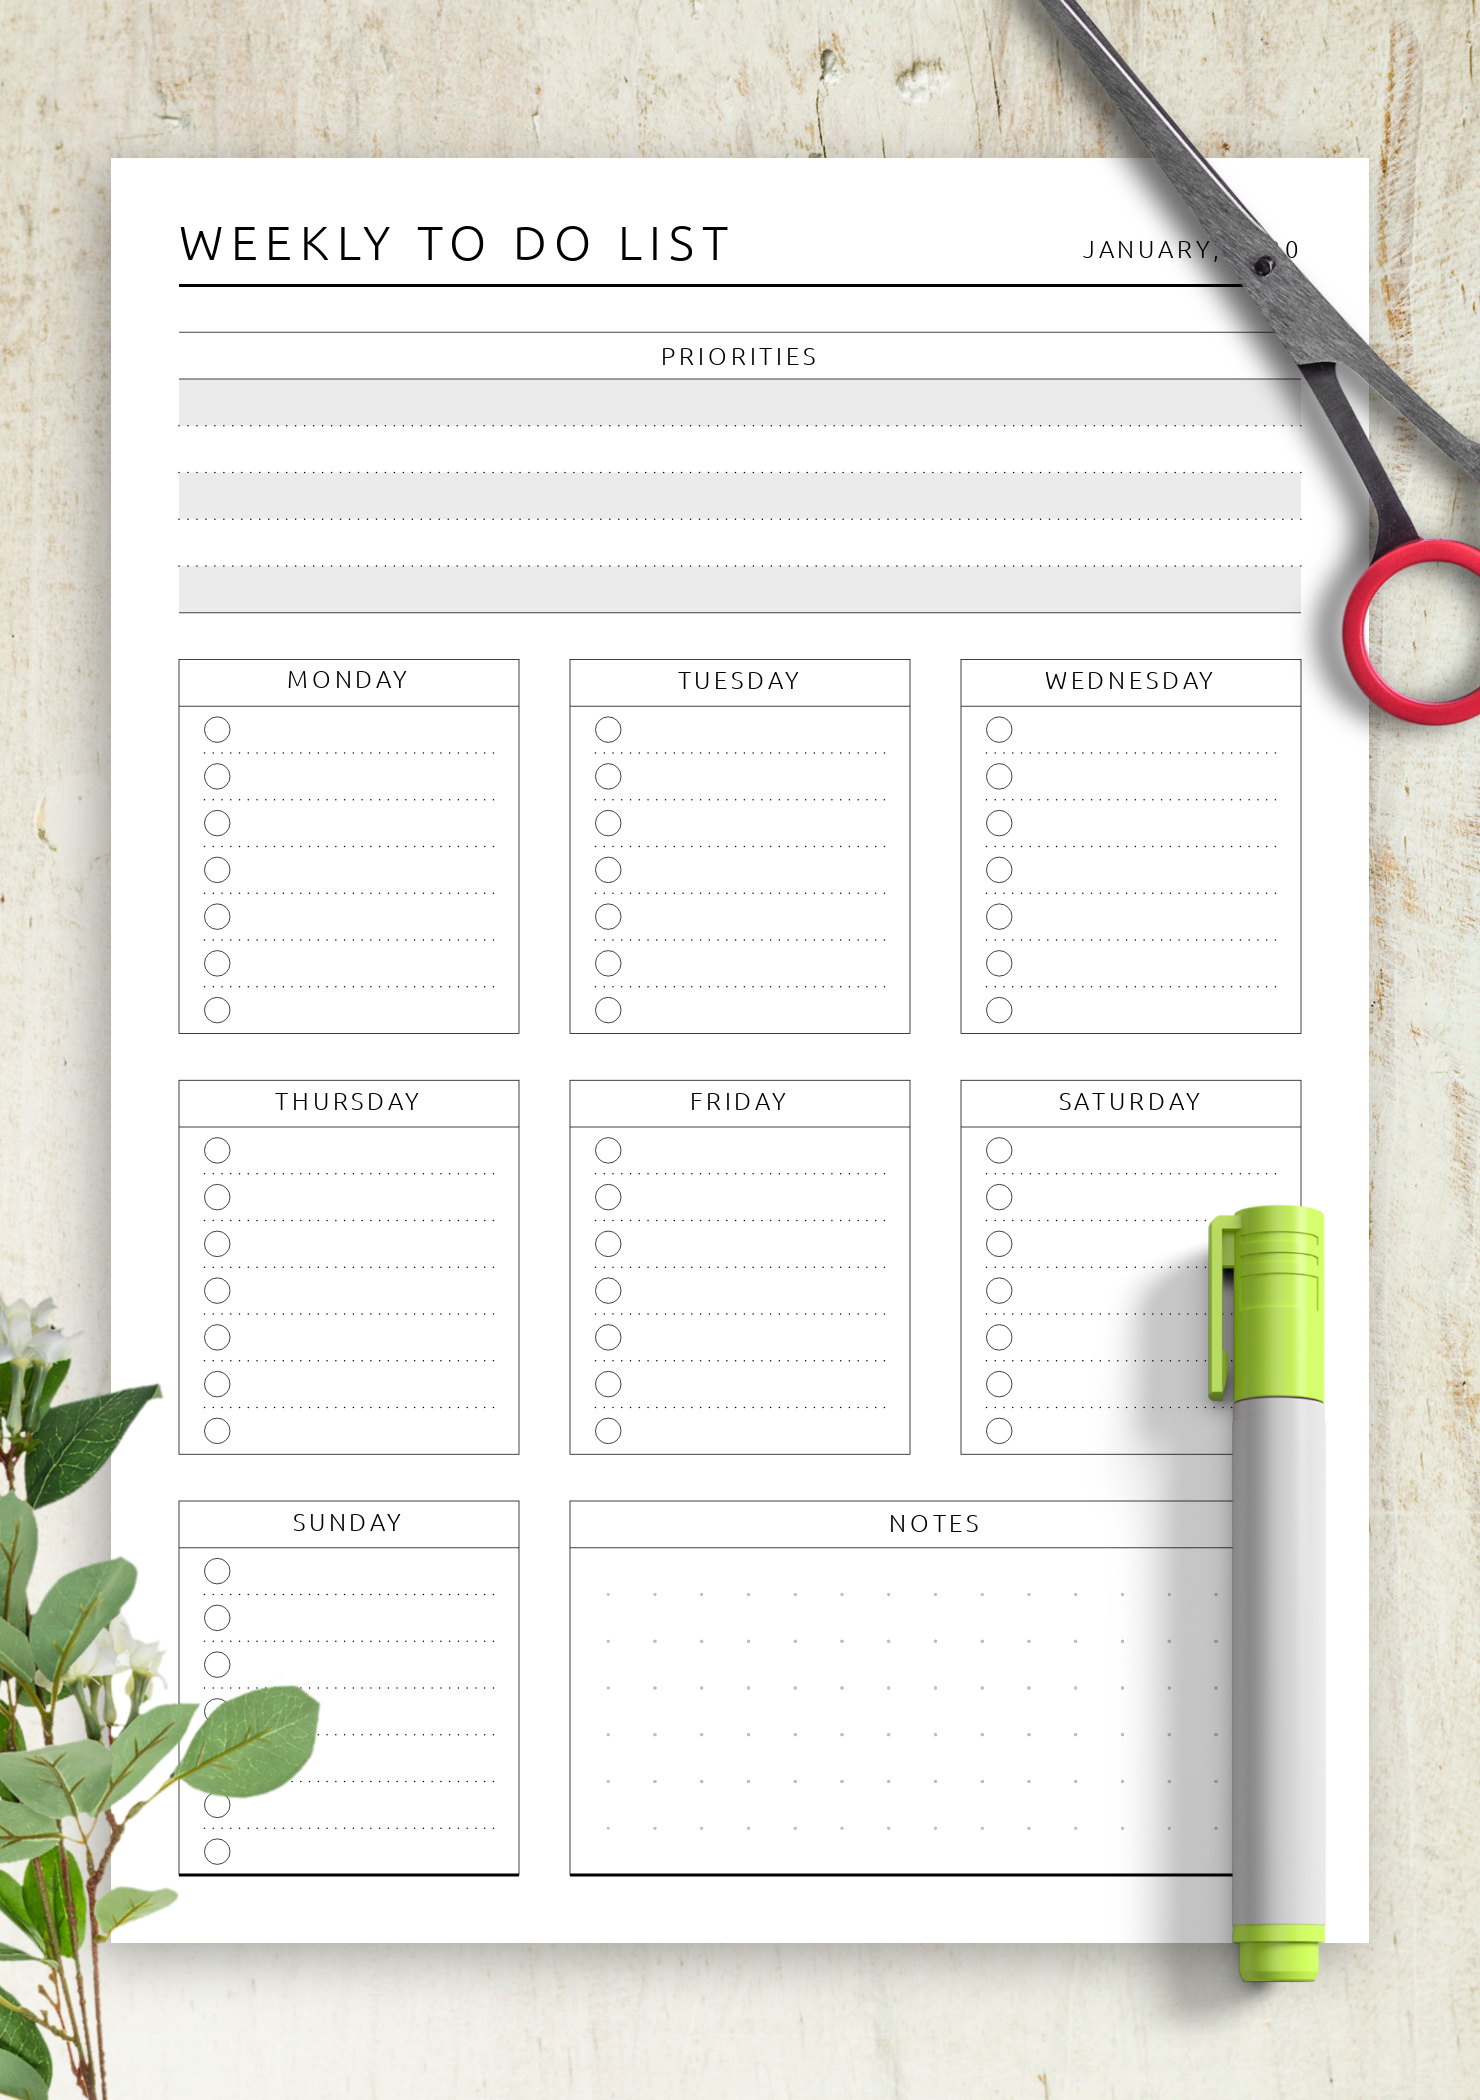 Download Printable Weekly To Do List - Original Style PDF